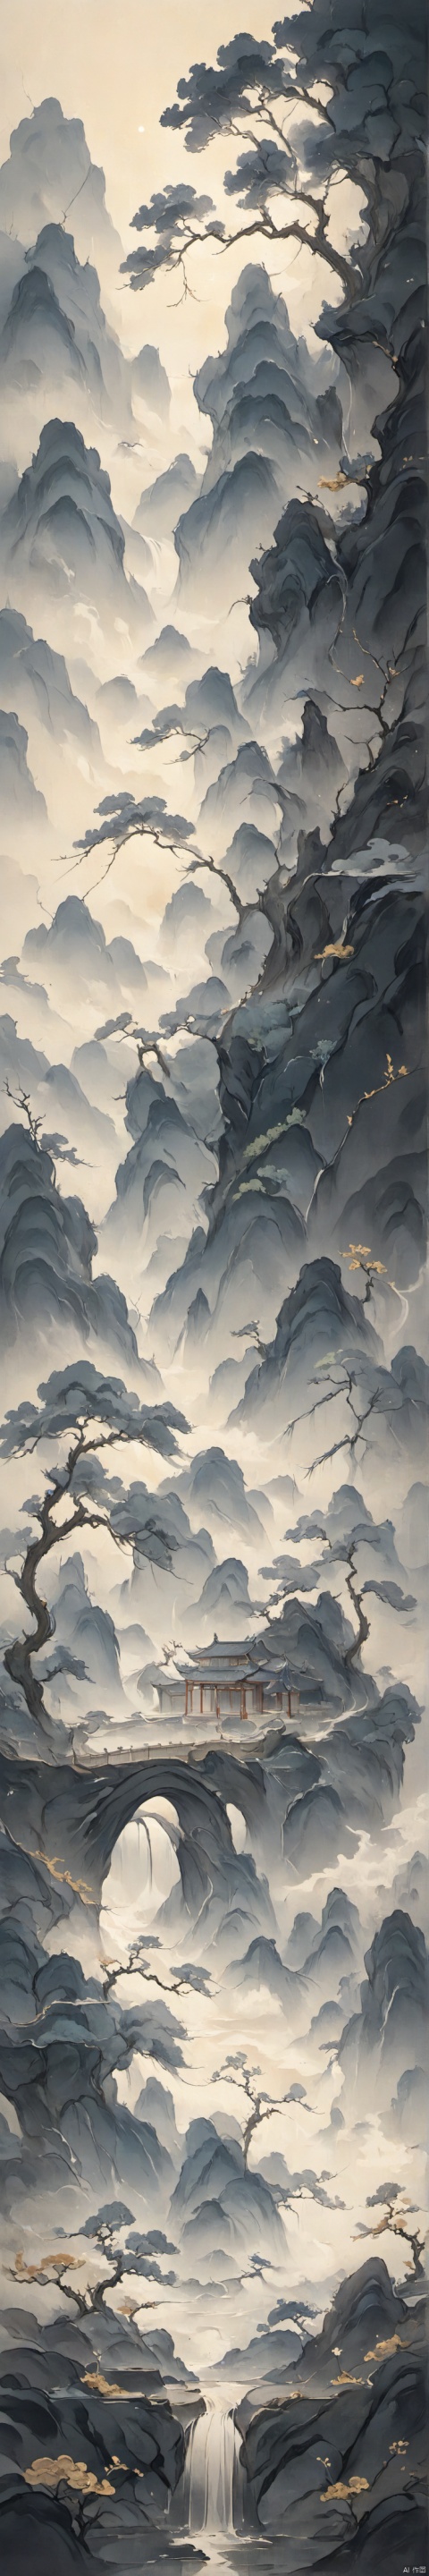 mountainous vistas, snowcap, summit overlooking endless, sea of clouds floating around mountain ridges, High mountains and flowing water, cypresses, pine, Pavilion, Temple, long stone steps, Fantasy, (ink style), (Chinese elaborate-style painting), minimalism, wash painting,ananmo,山水如画, Illustration